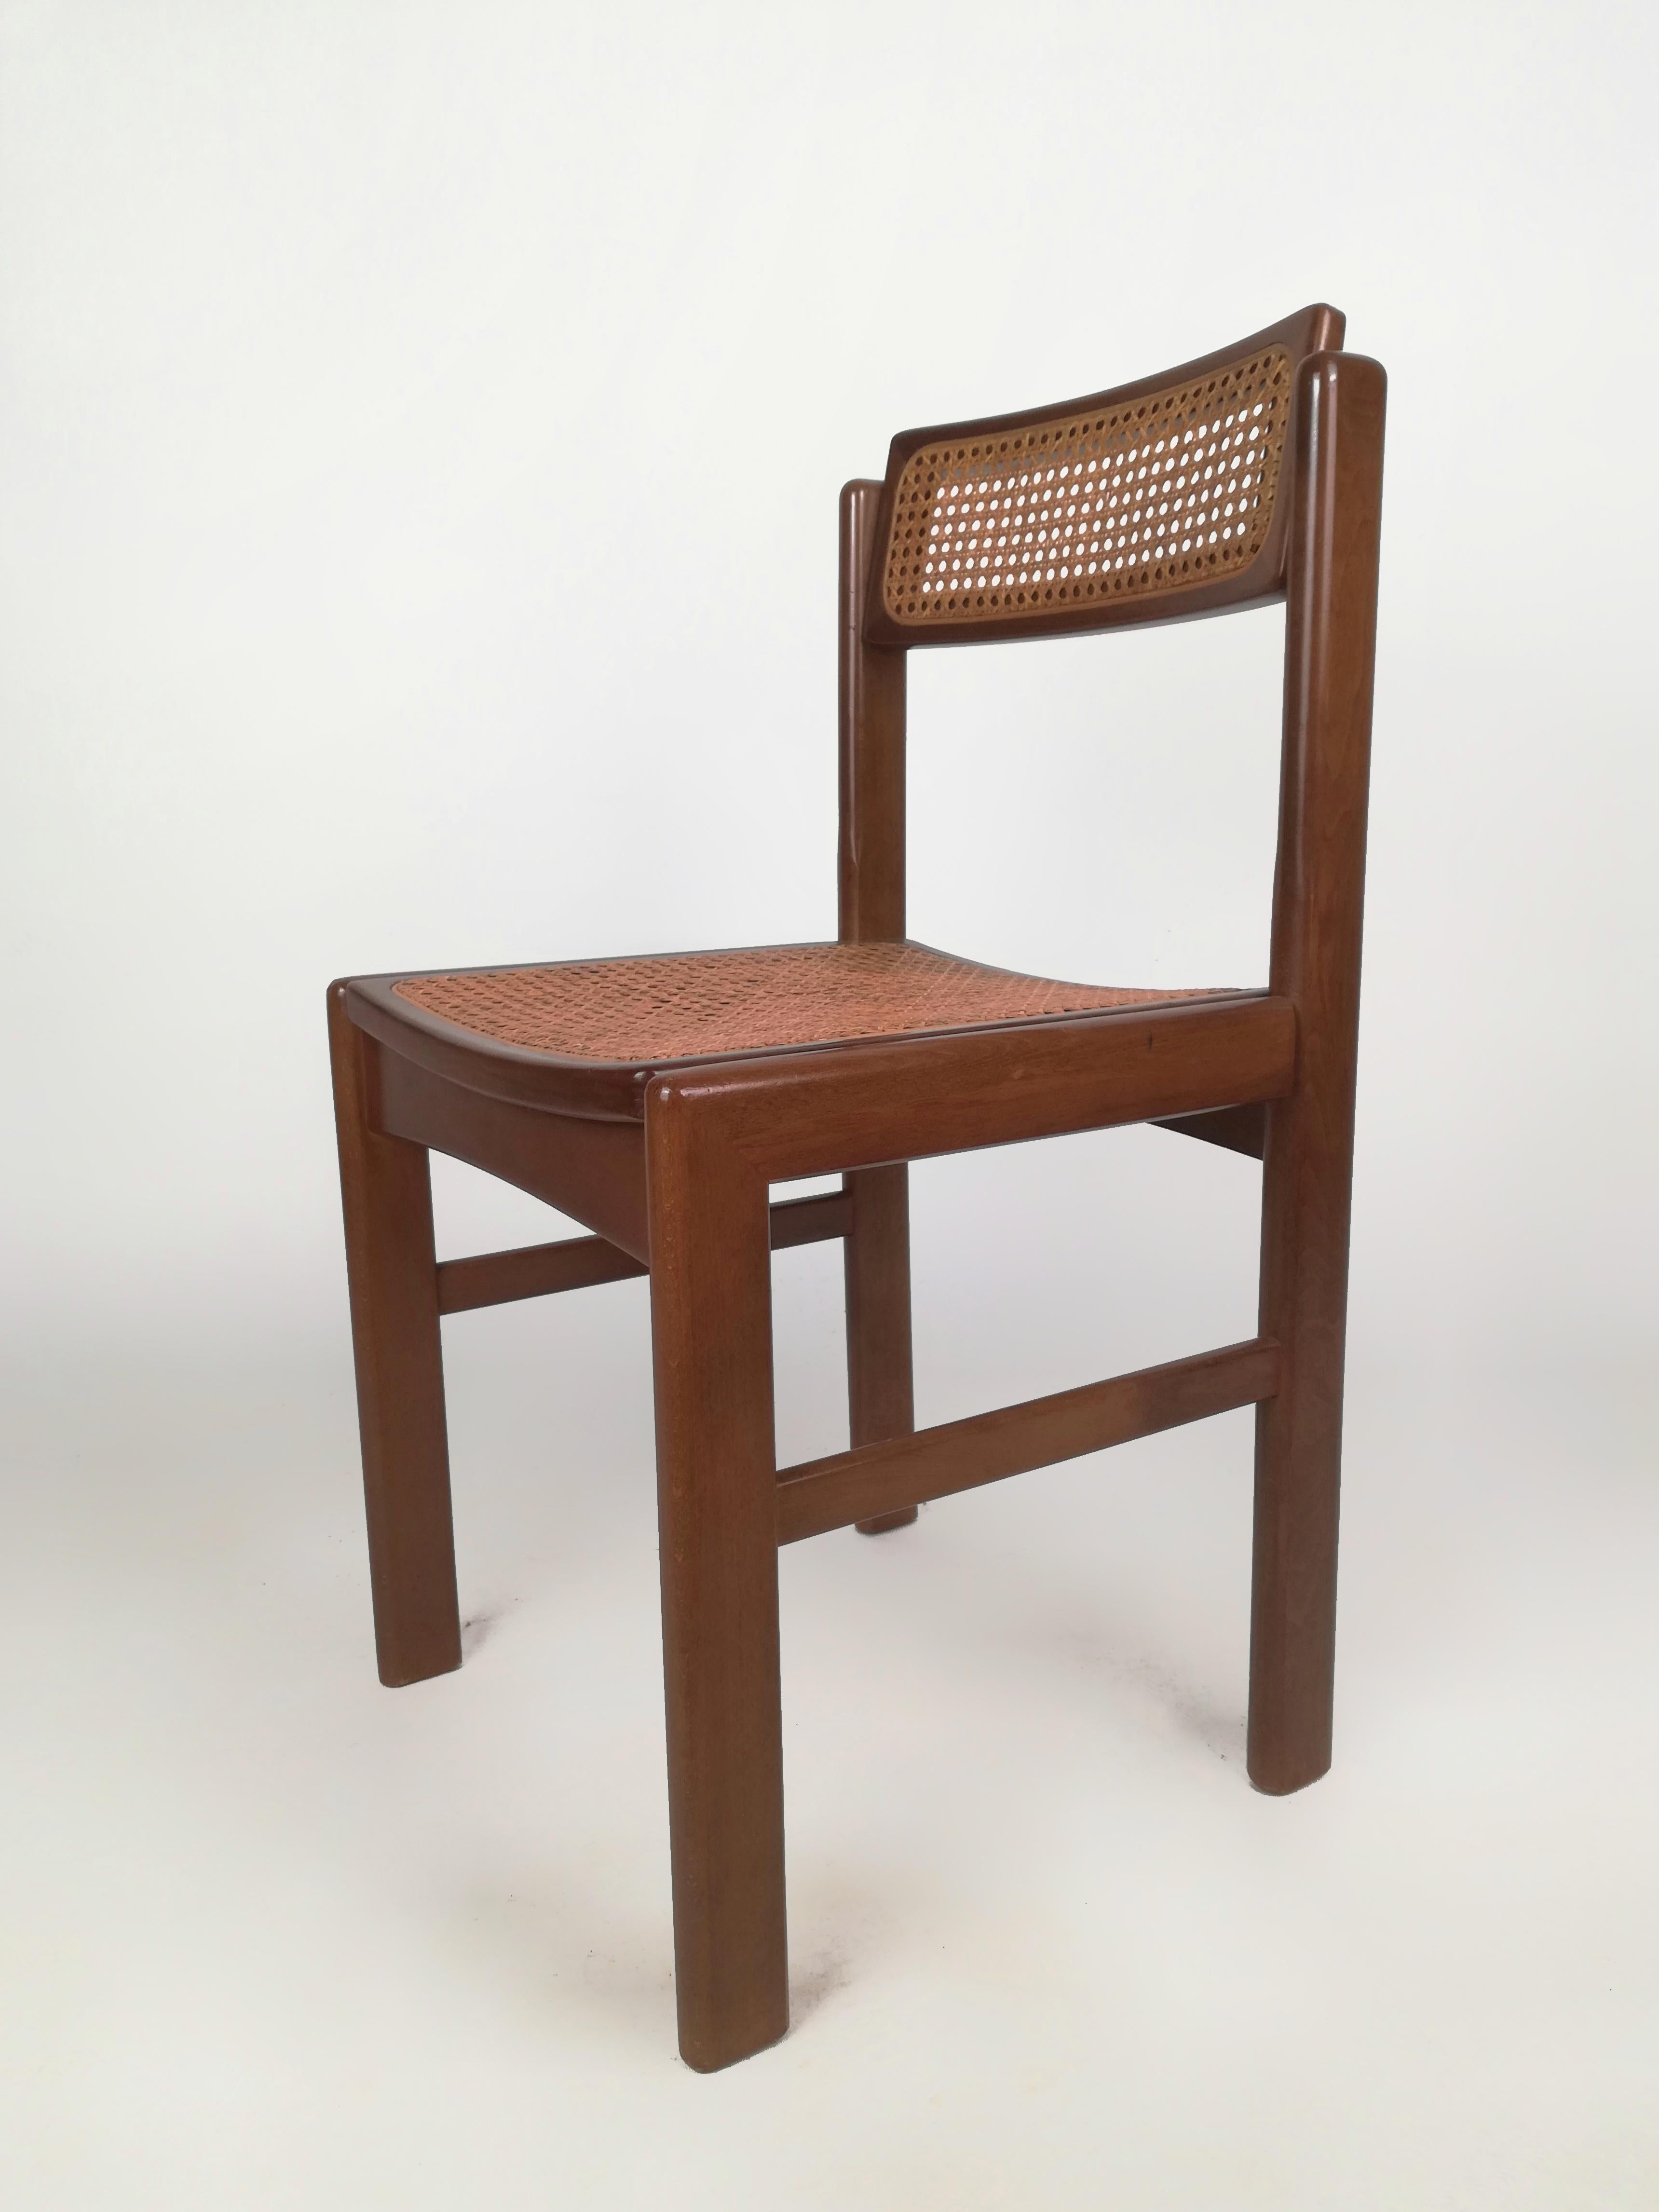 Six chairs in the style of Pierre Jeanneret for design and materials used.
Produced in Italy during the 70s, they have a solid structure in solid walnut, while the backrest and seat are made of Vienna straw.
The chairs have a beautiful patina and